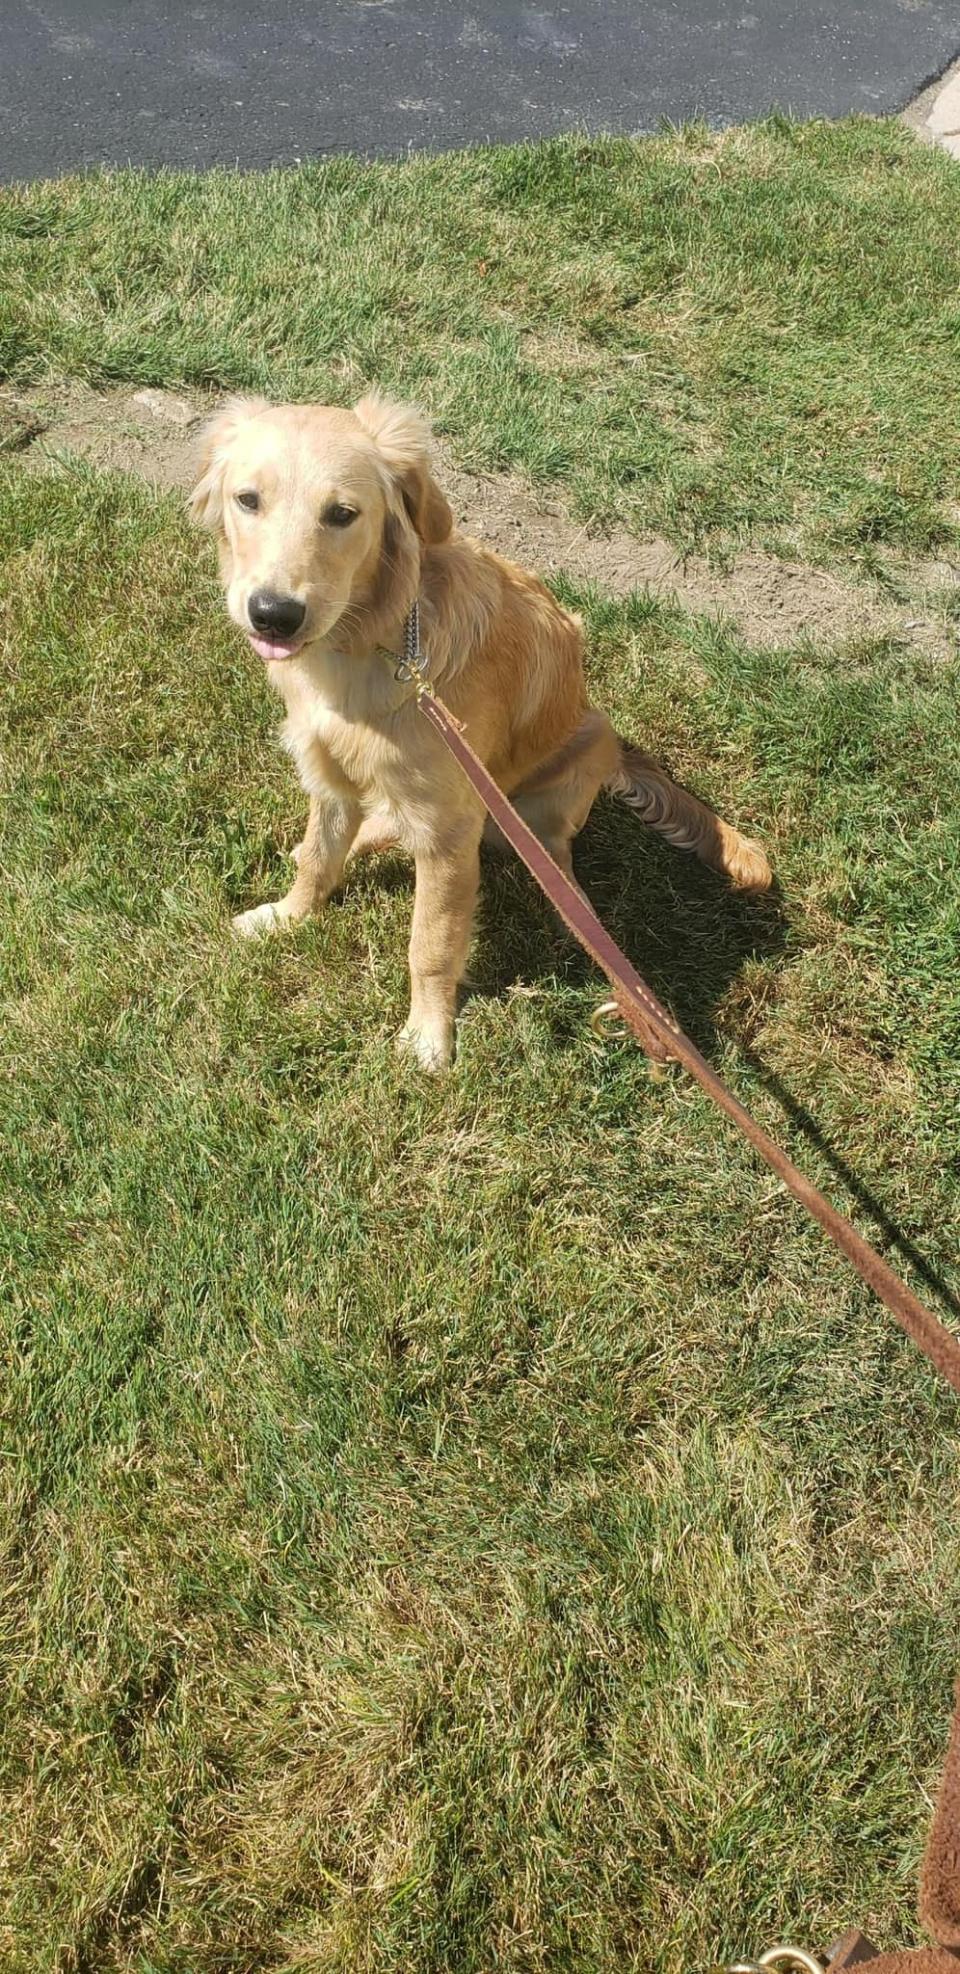 Charlie, a 6-month old golden retriever, found after being missing following a plane crash in Macomb County.